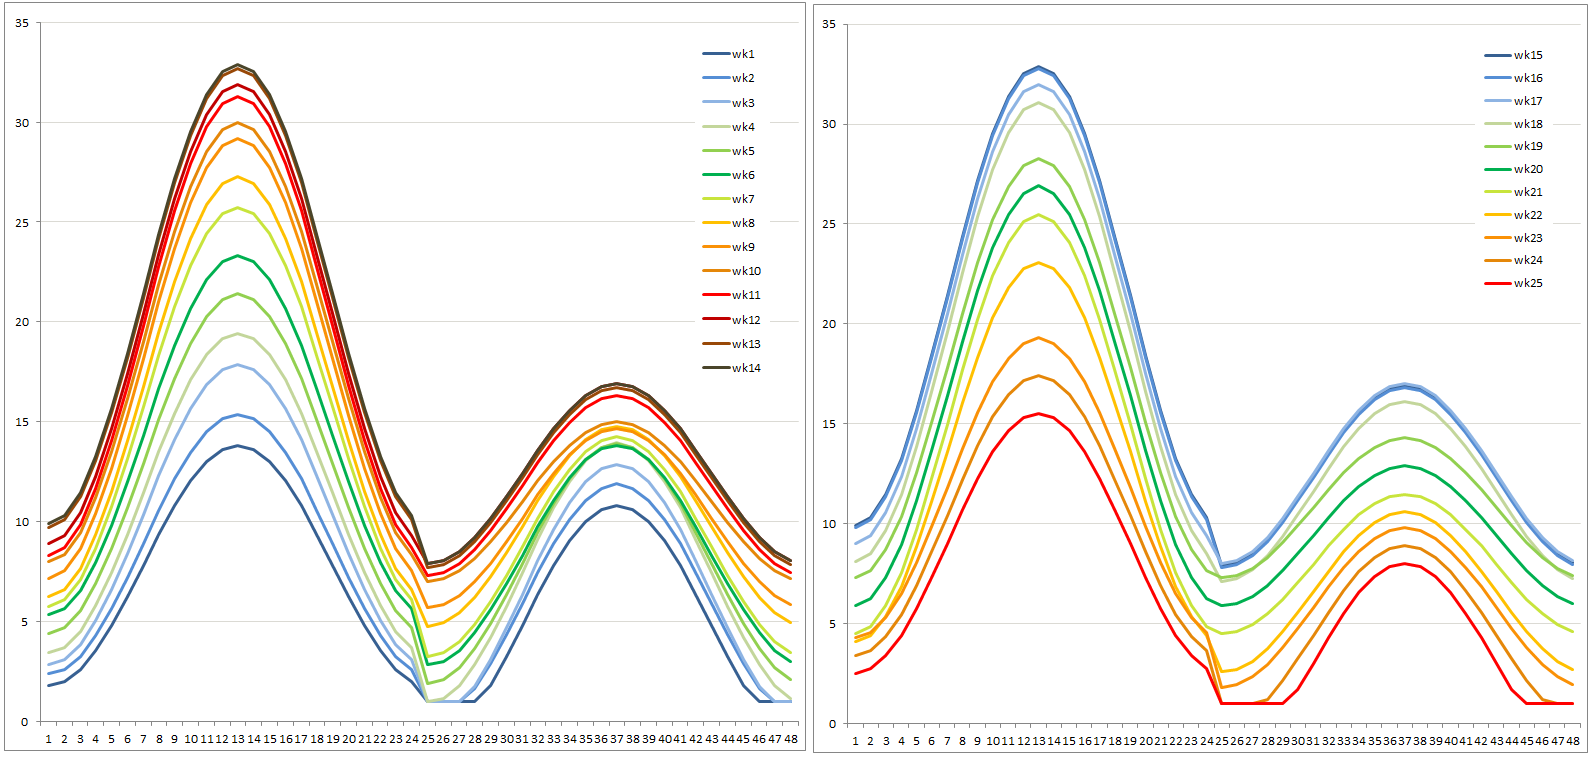 Daily temperatures on day 3 and 4 of the week. Each day represents one of the two alternating phases (warm sunny days and cool cloudy days) introduced to render the growing regimes more realistic. Left: gradually increasing temperatures during spring. Right: gradually decreasing temperatures from July 15 onwards.